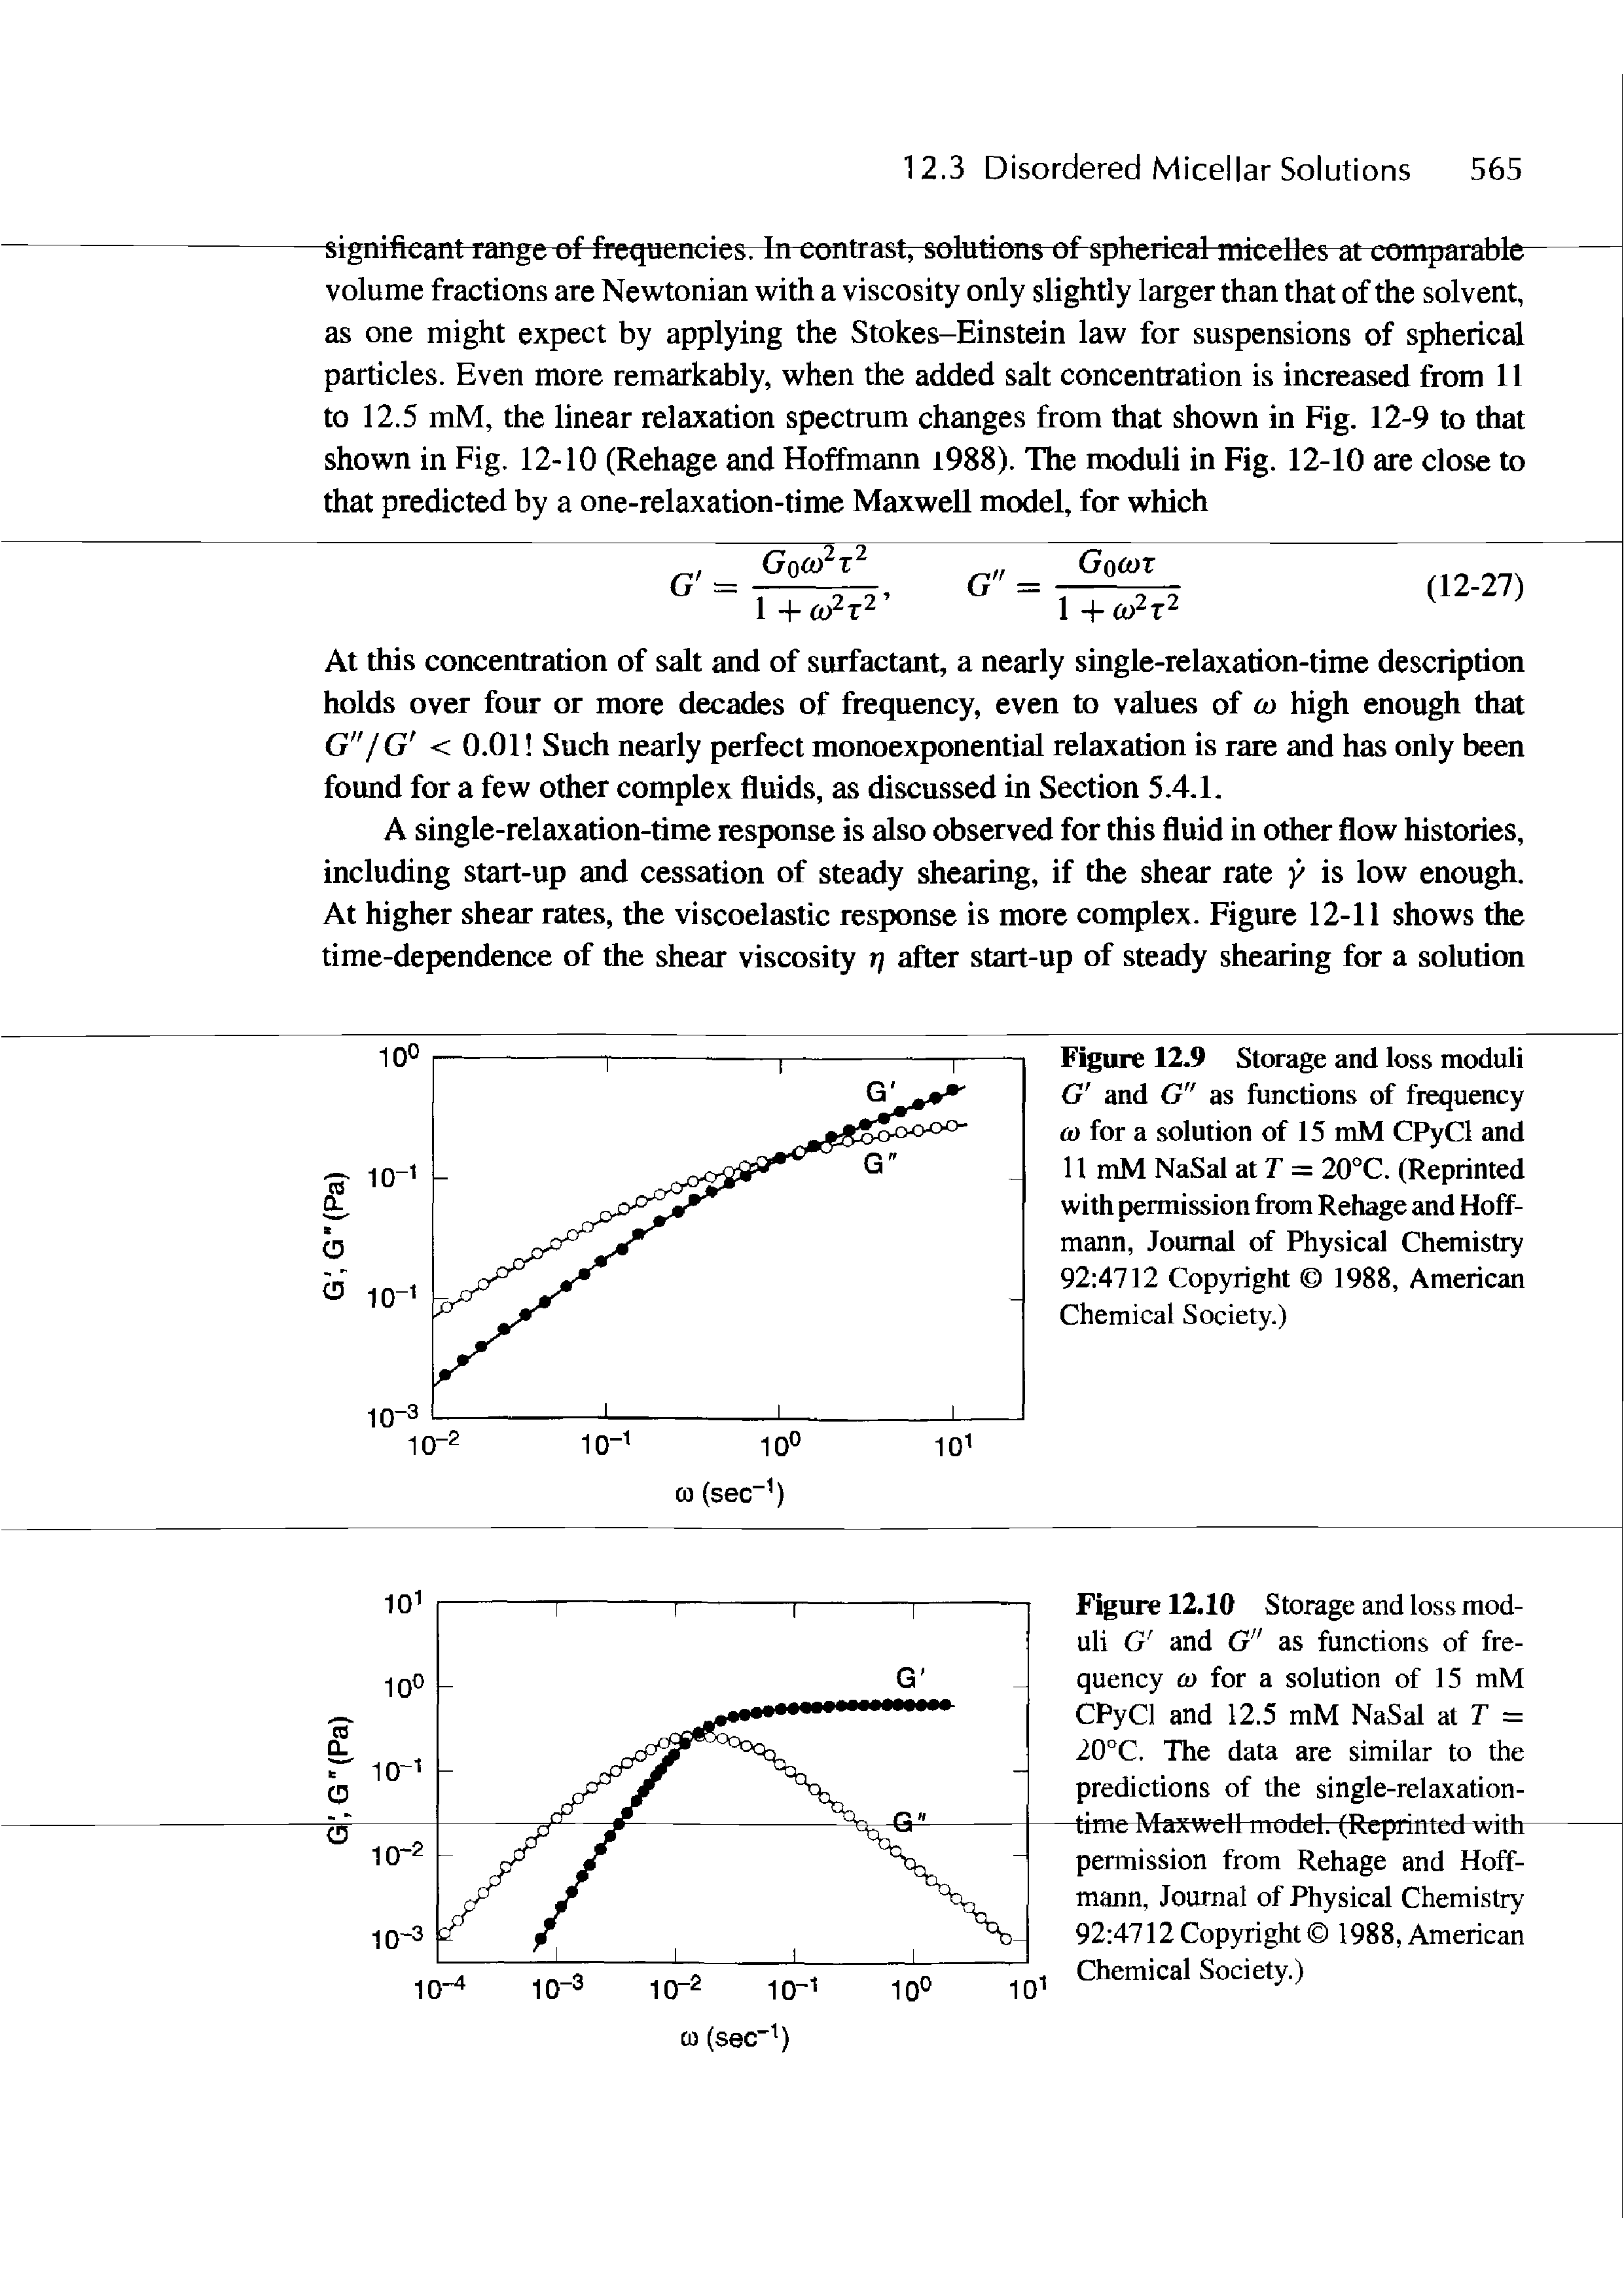 Figure 12.10 Storage and loss moduli G and G" as functions of frequency 0) for a solution of 15 mM CPyCl and 12.5 mM NaSal at T = 20°C. The data are similar to the predictions of the single-relaxation-time Maxwell model. (Reprinted with permission from Rehage and Hoffmann, Journal of Physical Chemistry 92 4712 Copyright 1988, American Chemical Society.)...